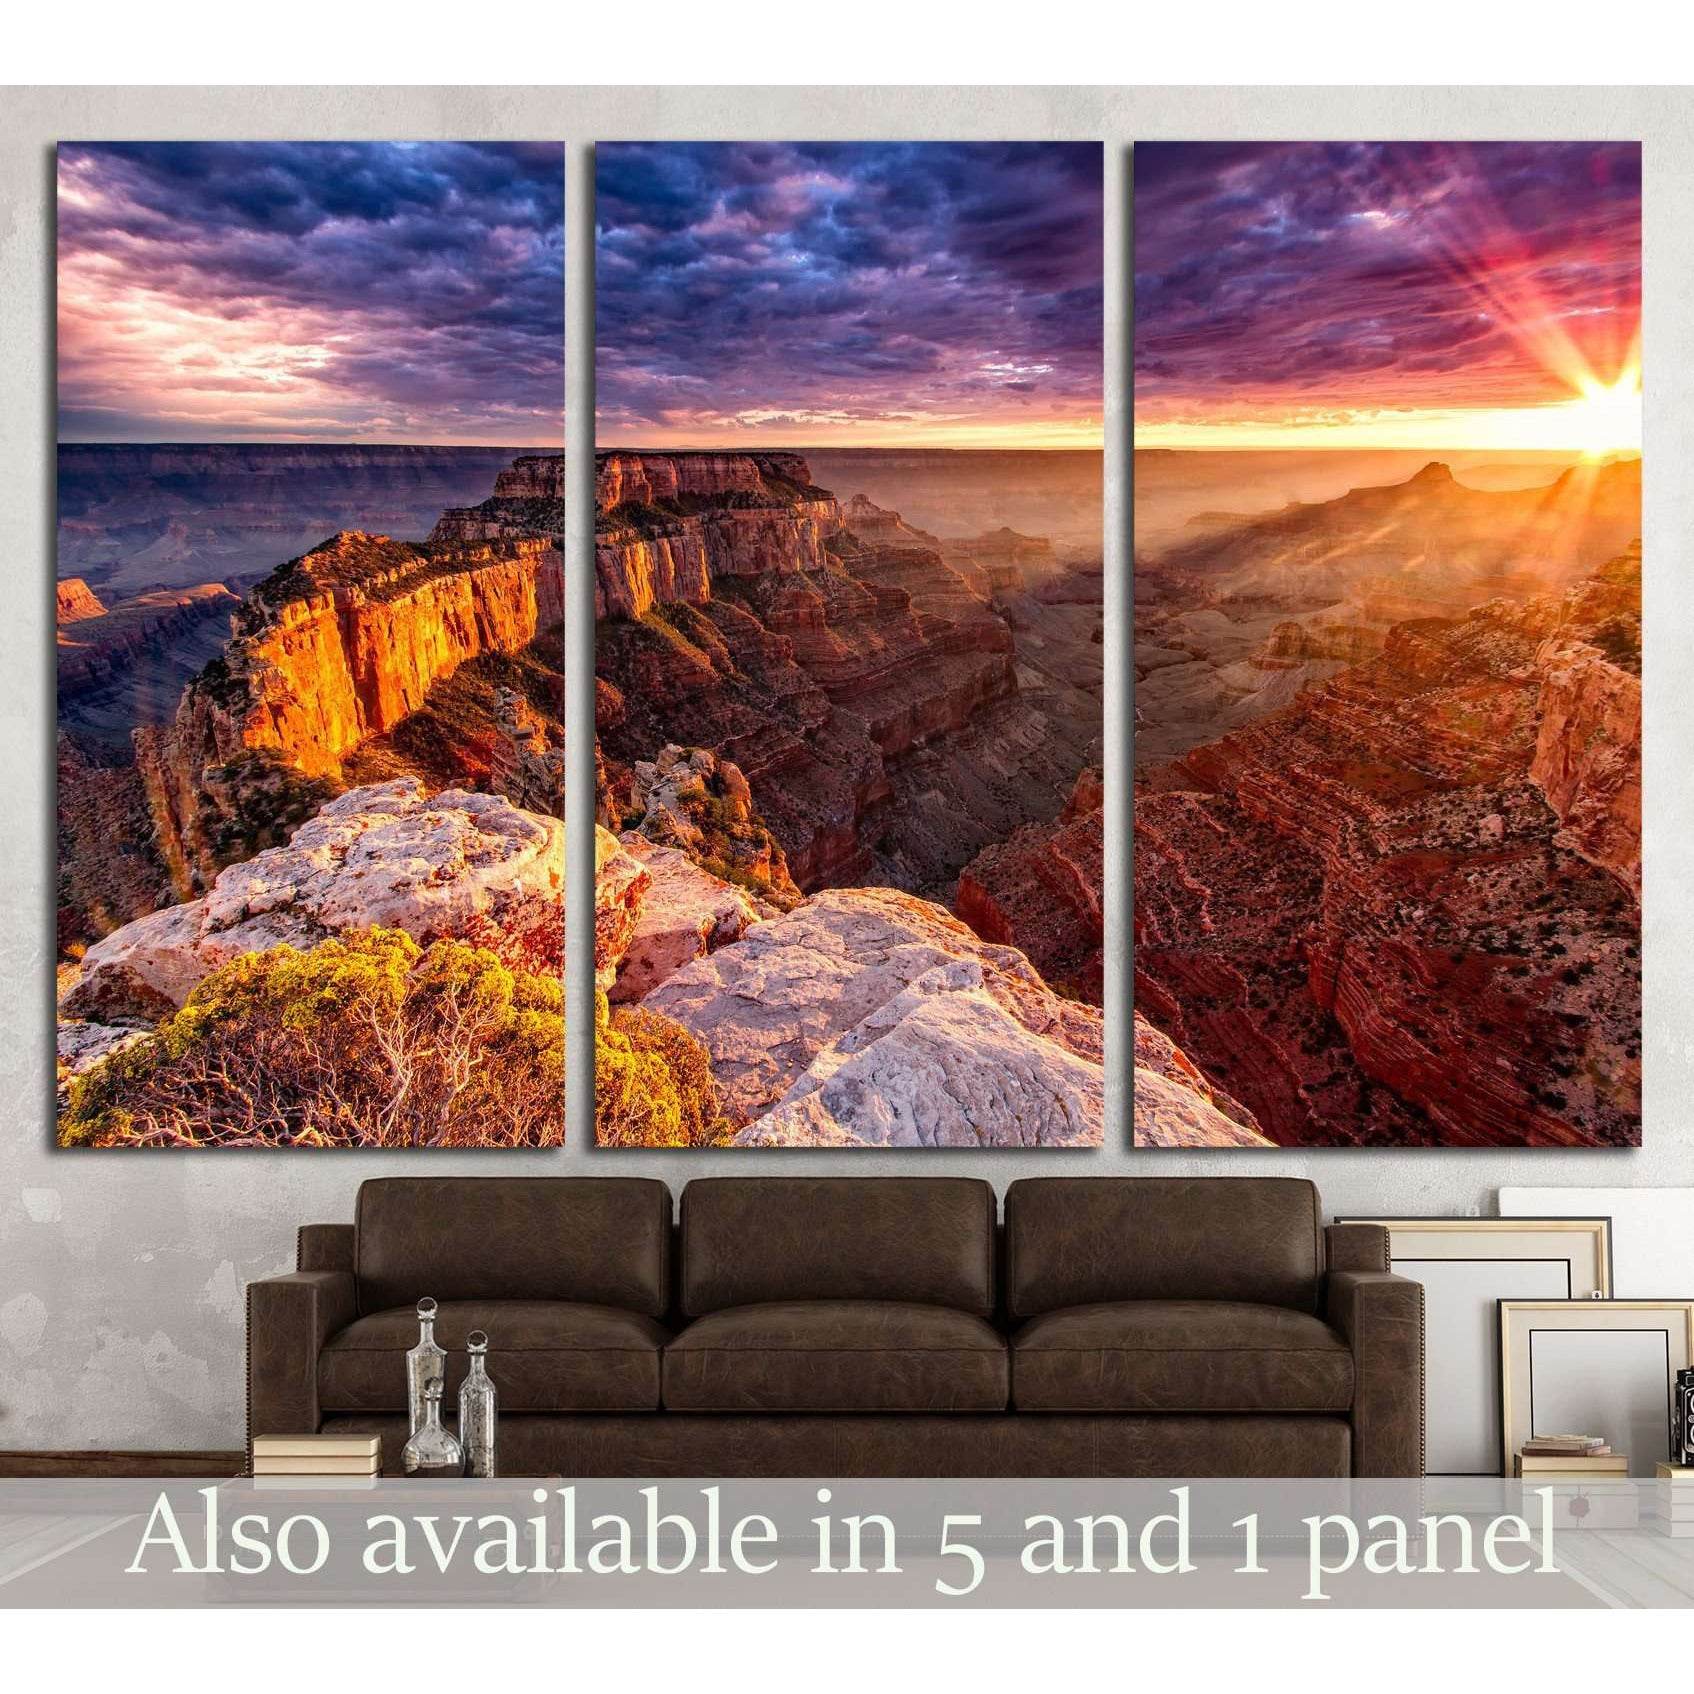 North Rim Grand Canyon Cape Royal №1962 Ready to Hang Canvas PrintThis triptych canvas print captures the breathtaking beauty of the North Rim of the Grand Canyon from Cape Royal at sunrise. The warm sunlight bathes the intricate rock formations in a gold